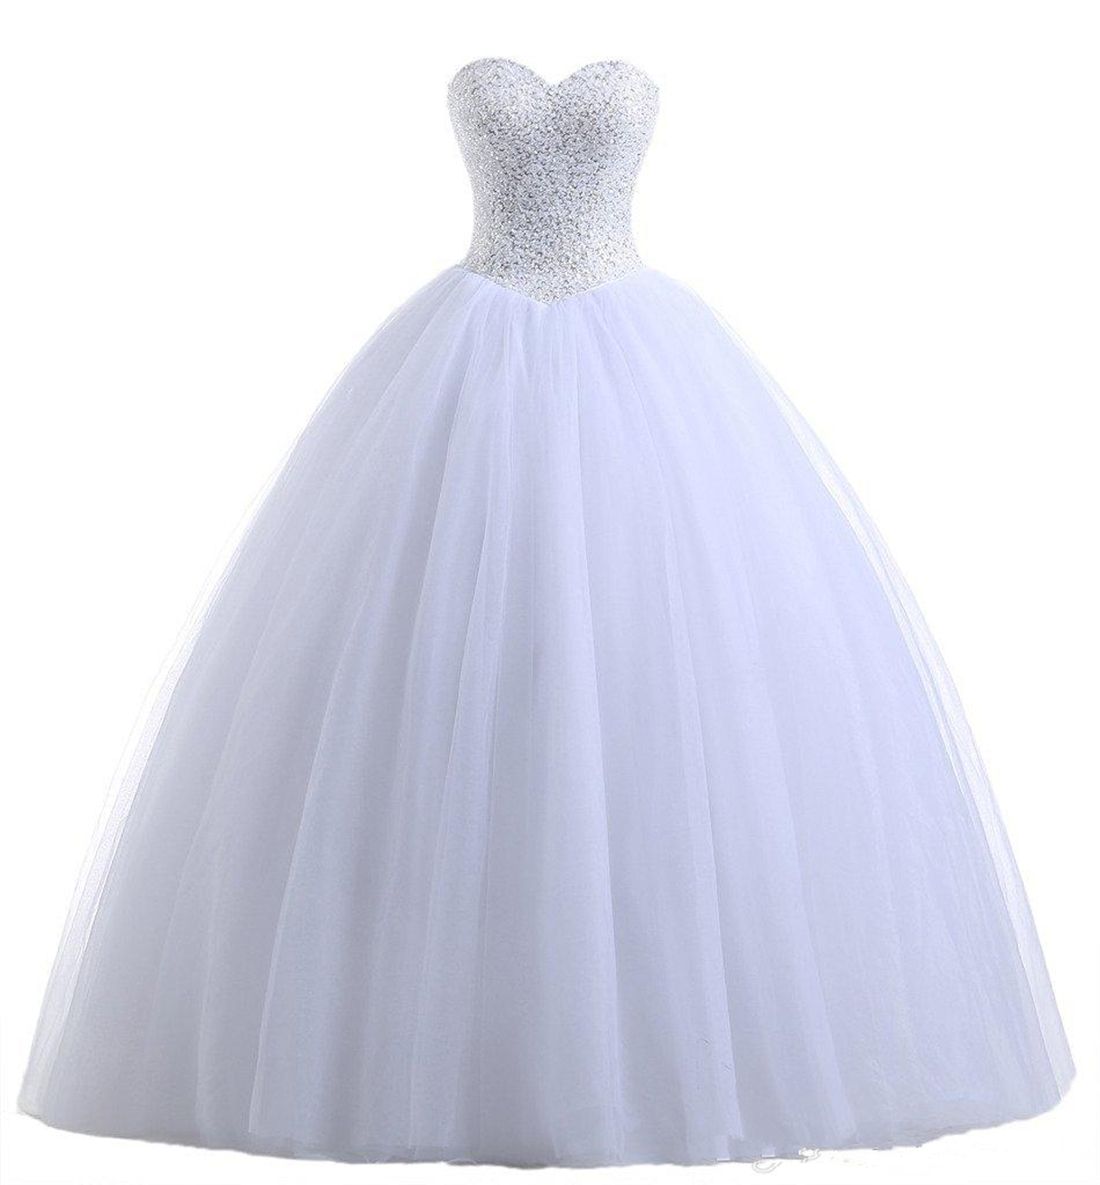 2018 Sexy White Ball Gown Quinceanera 